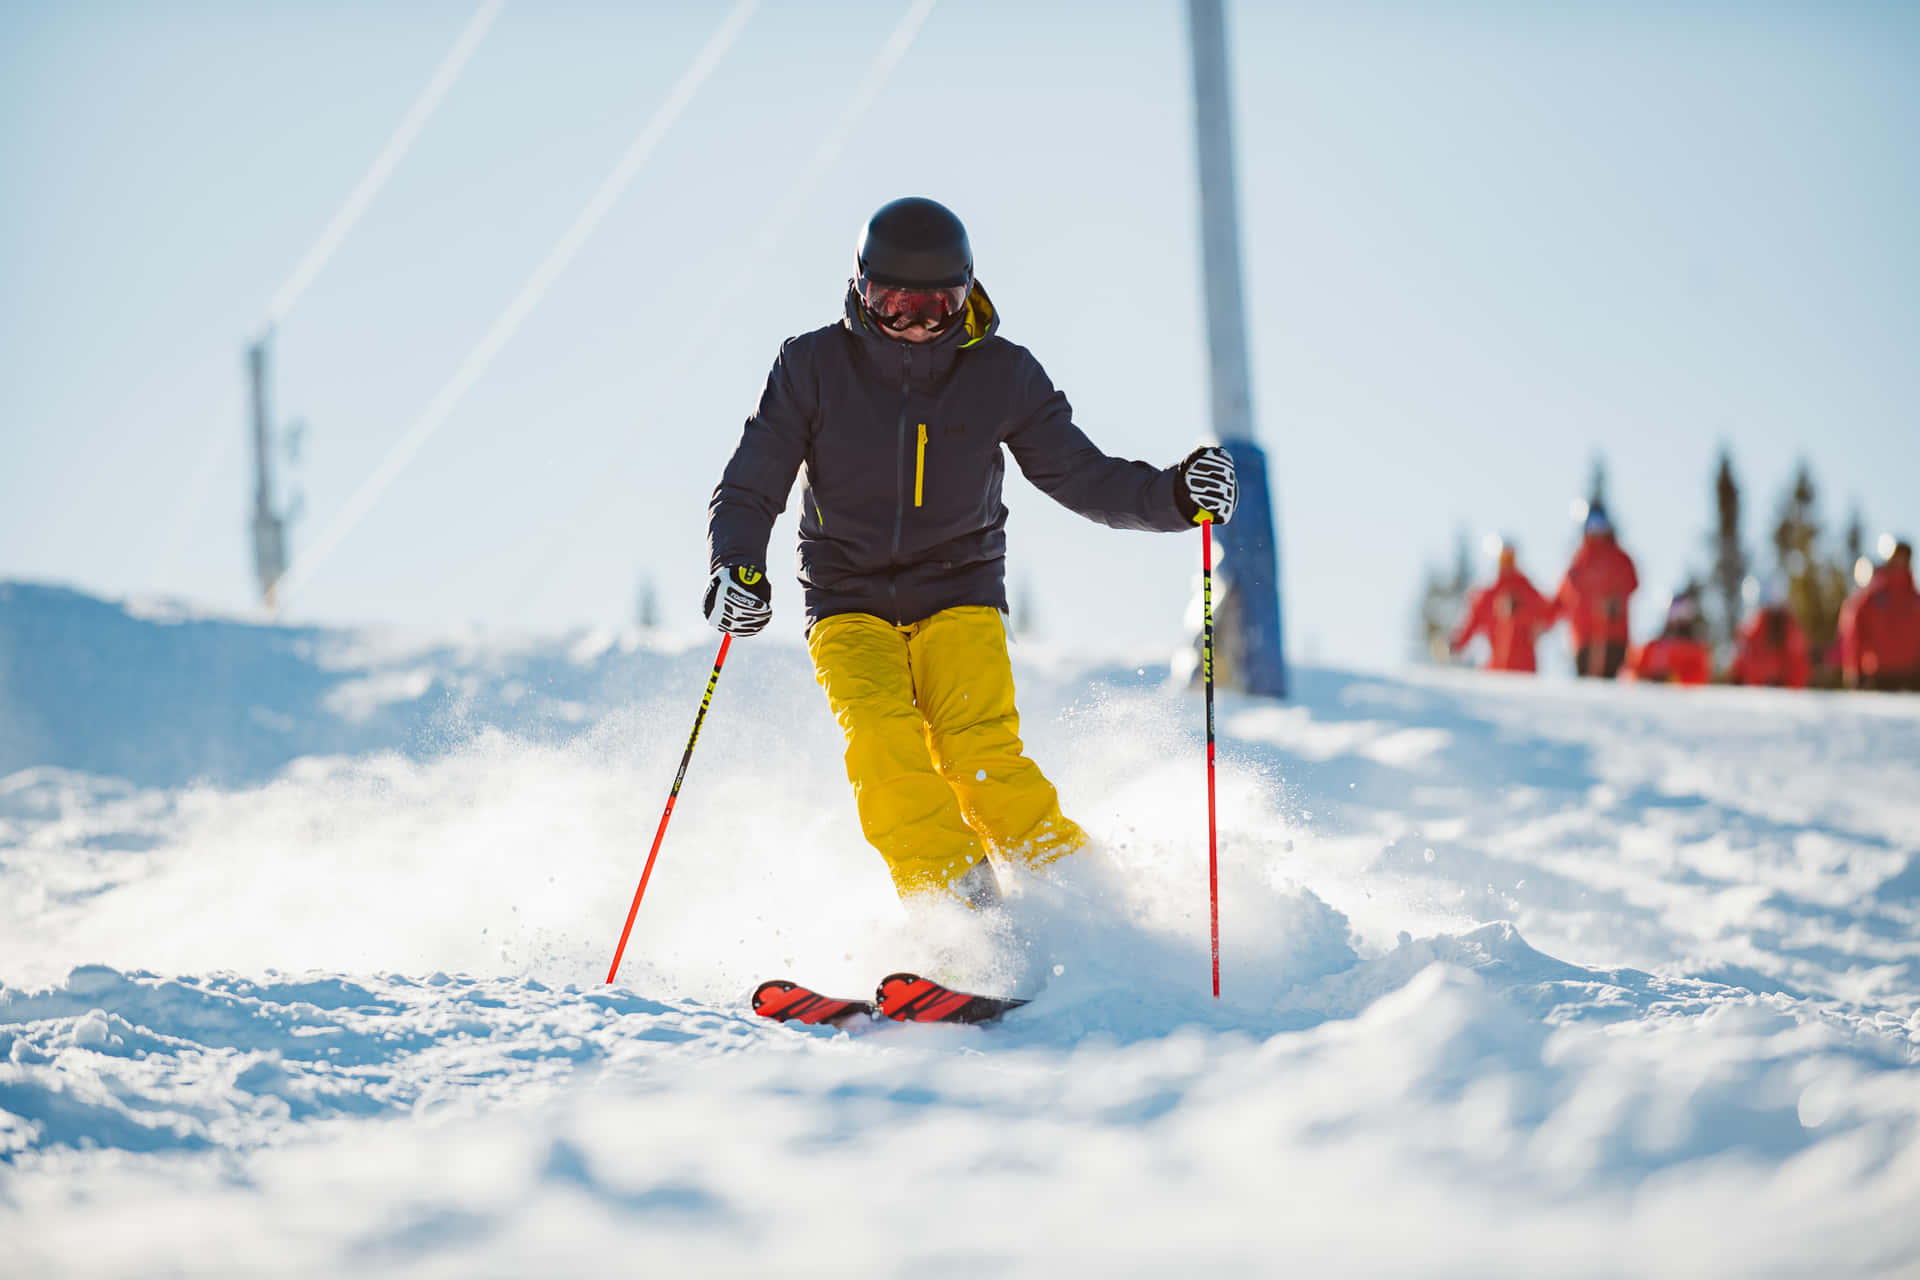 A Man Skiing Down A Snowy Slope